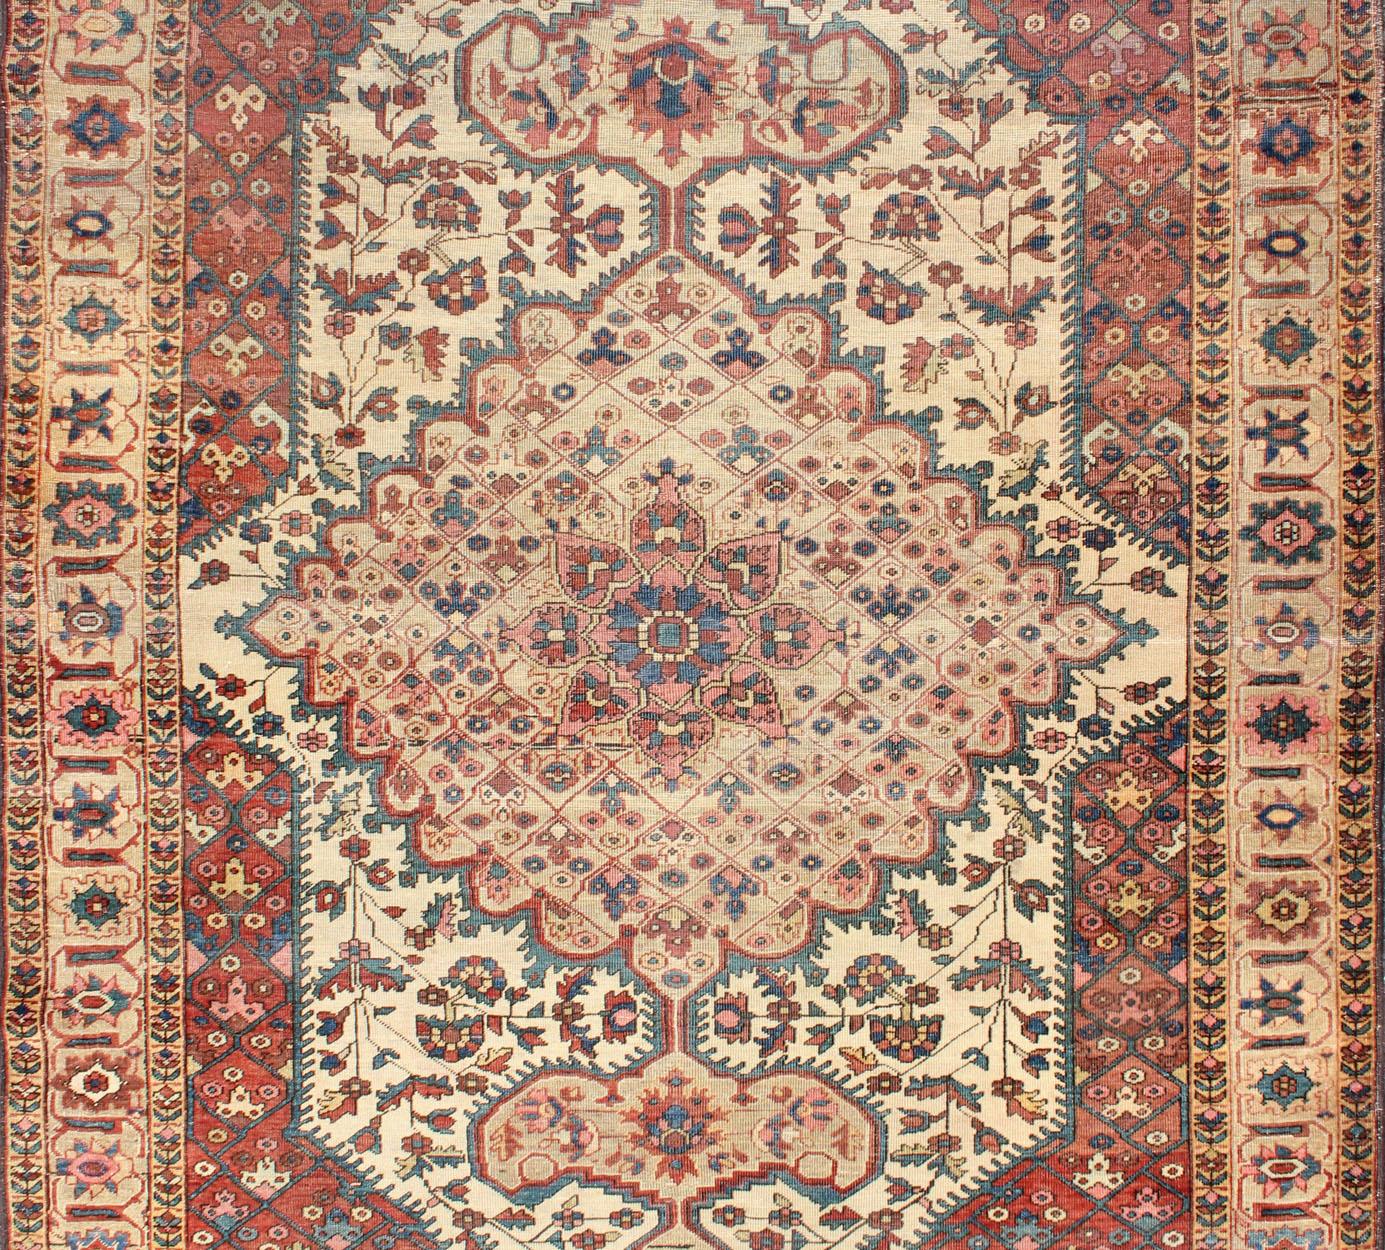 Sarouk Farahan Antique Feraghan Sarouk Rug in Ivory Background, Brown Red, Camel, and Teal For Sale